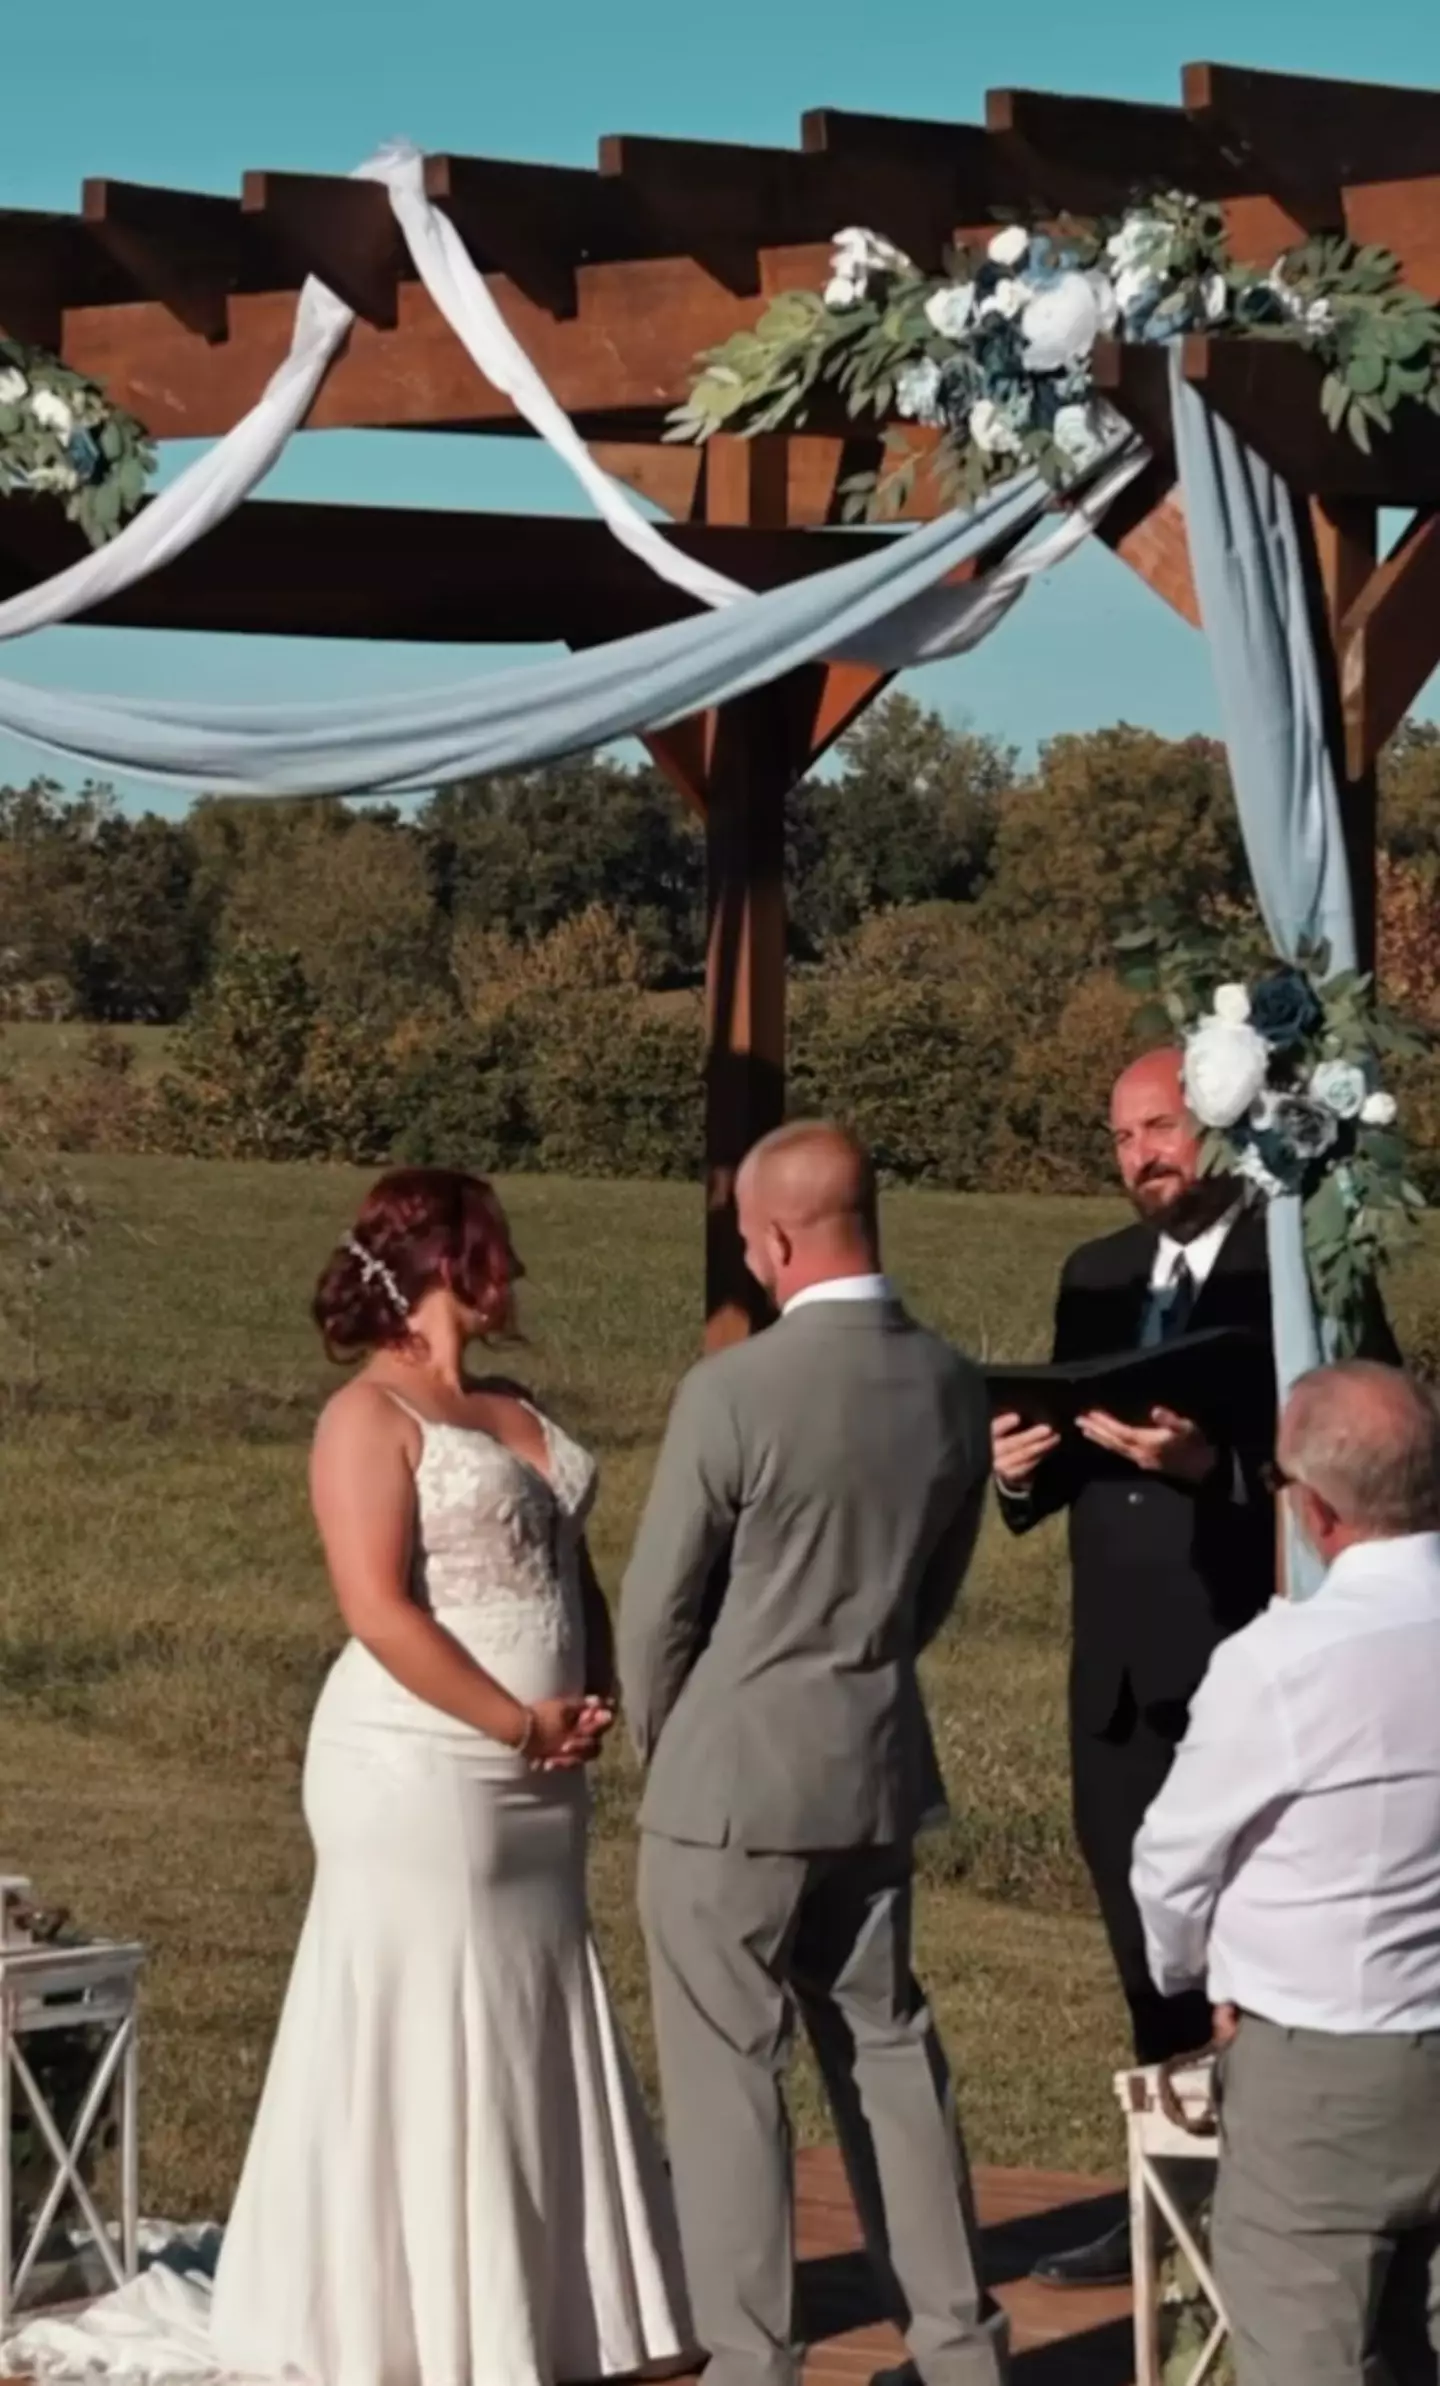 The officiant even tried to encourage the groom to reconsider his explicit vows.